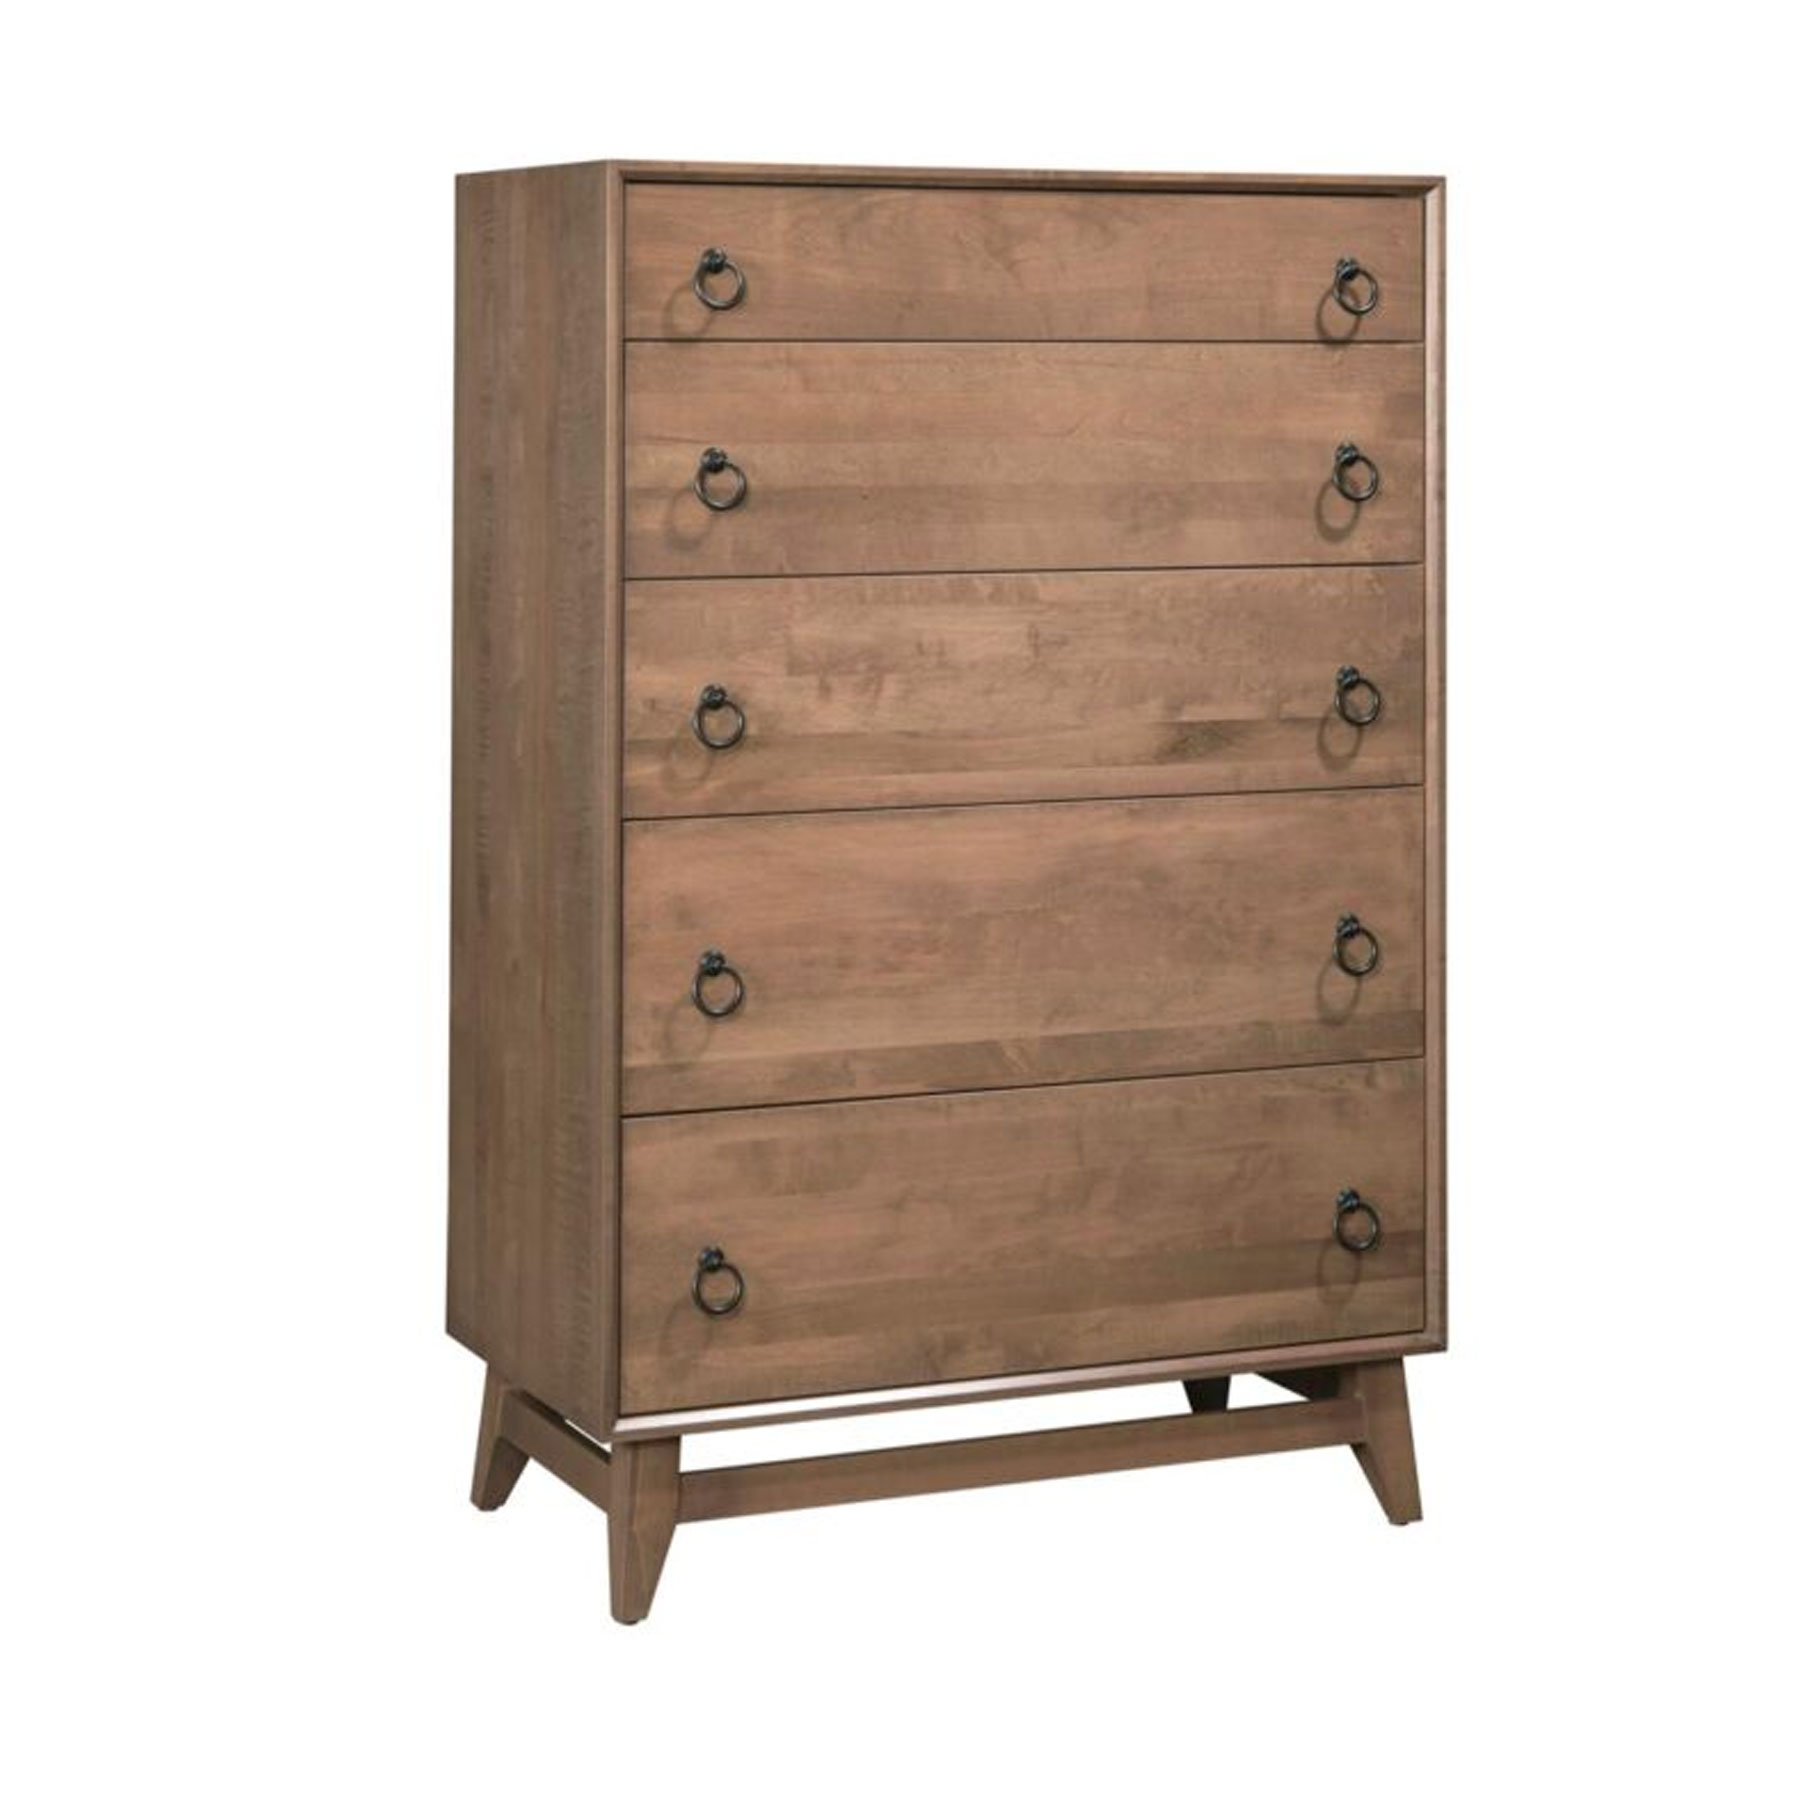 Allentown Chest of Drawers